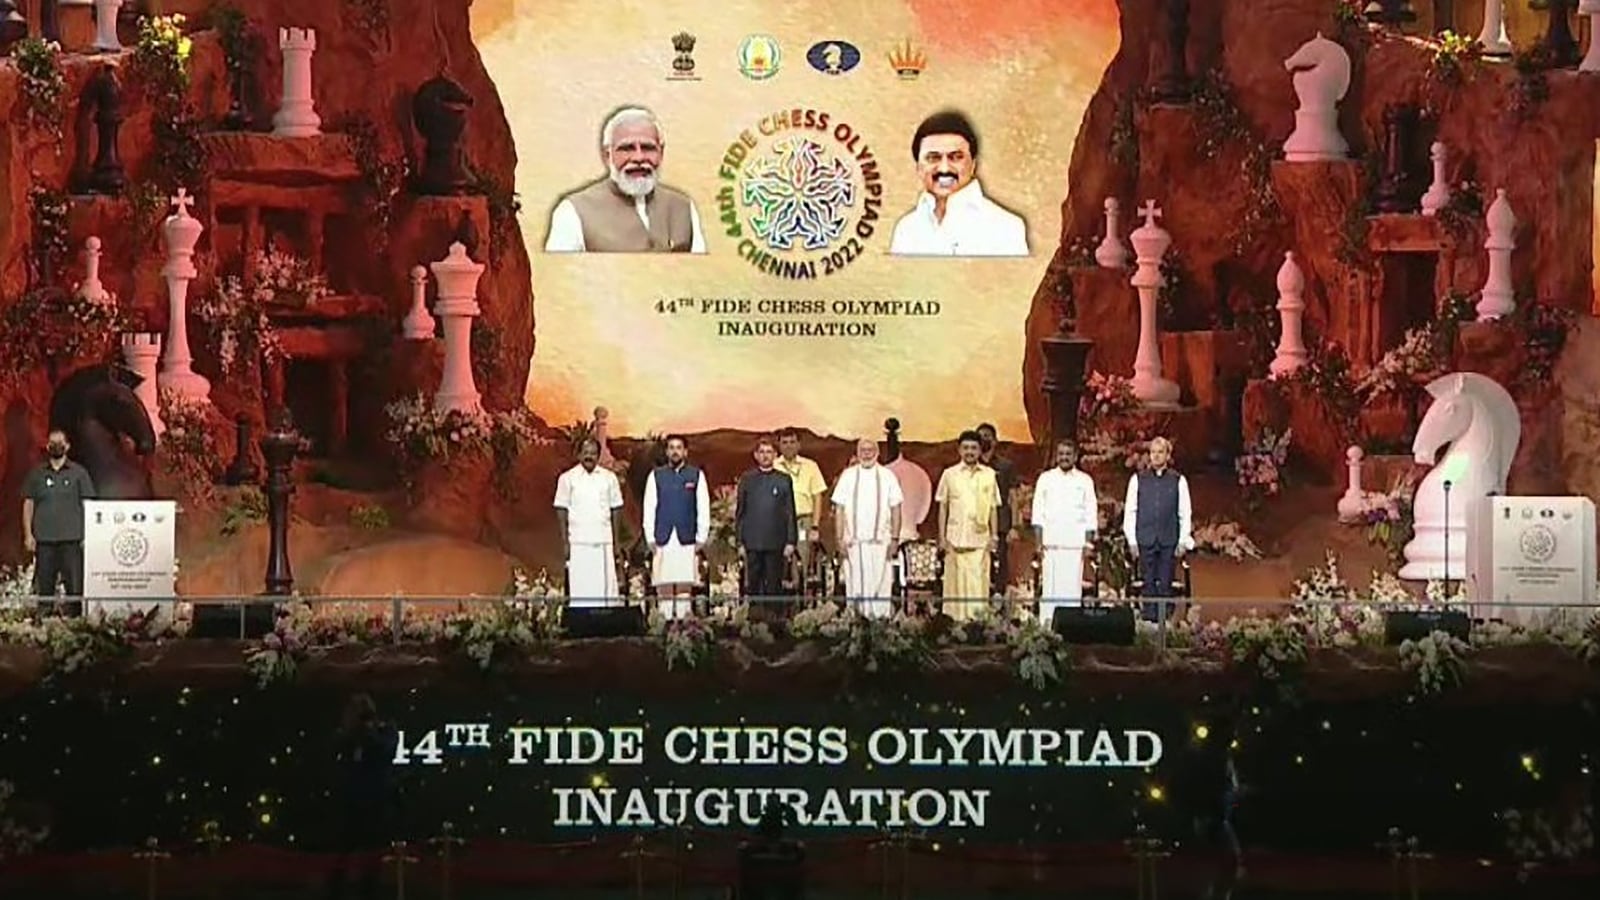 Prime Minister Narendra Modi inaugurated the 44th Chess Olympiad